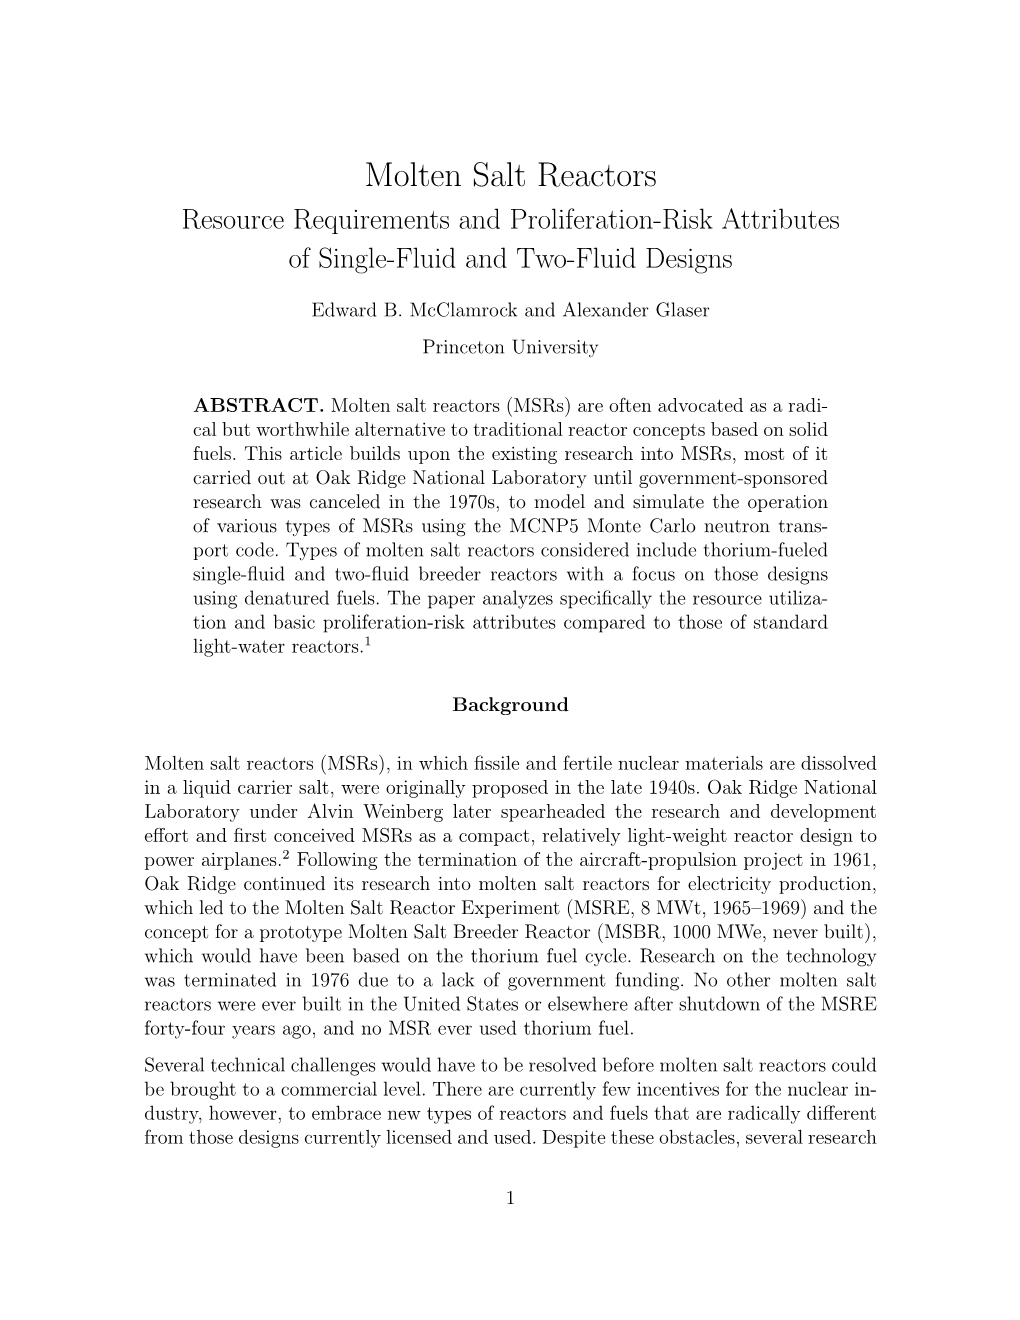 Molten Salt Reactors Resource Requirements and Proliferation-Risk Attributes of Single-Fluid and Two-Fluid Designs